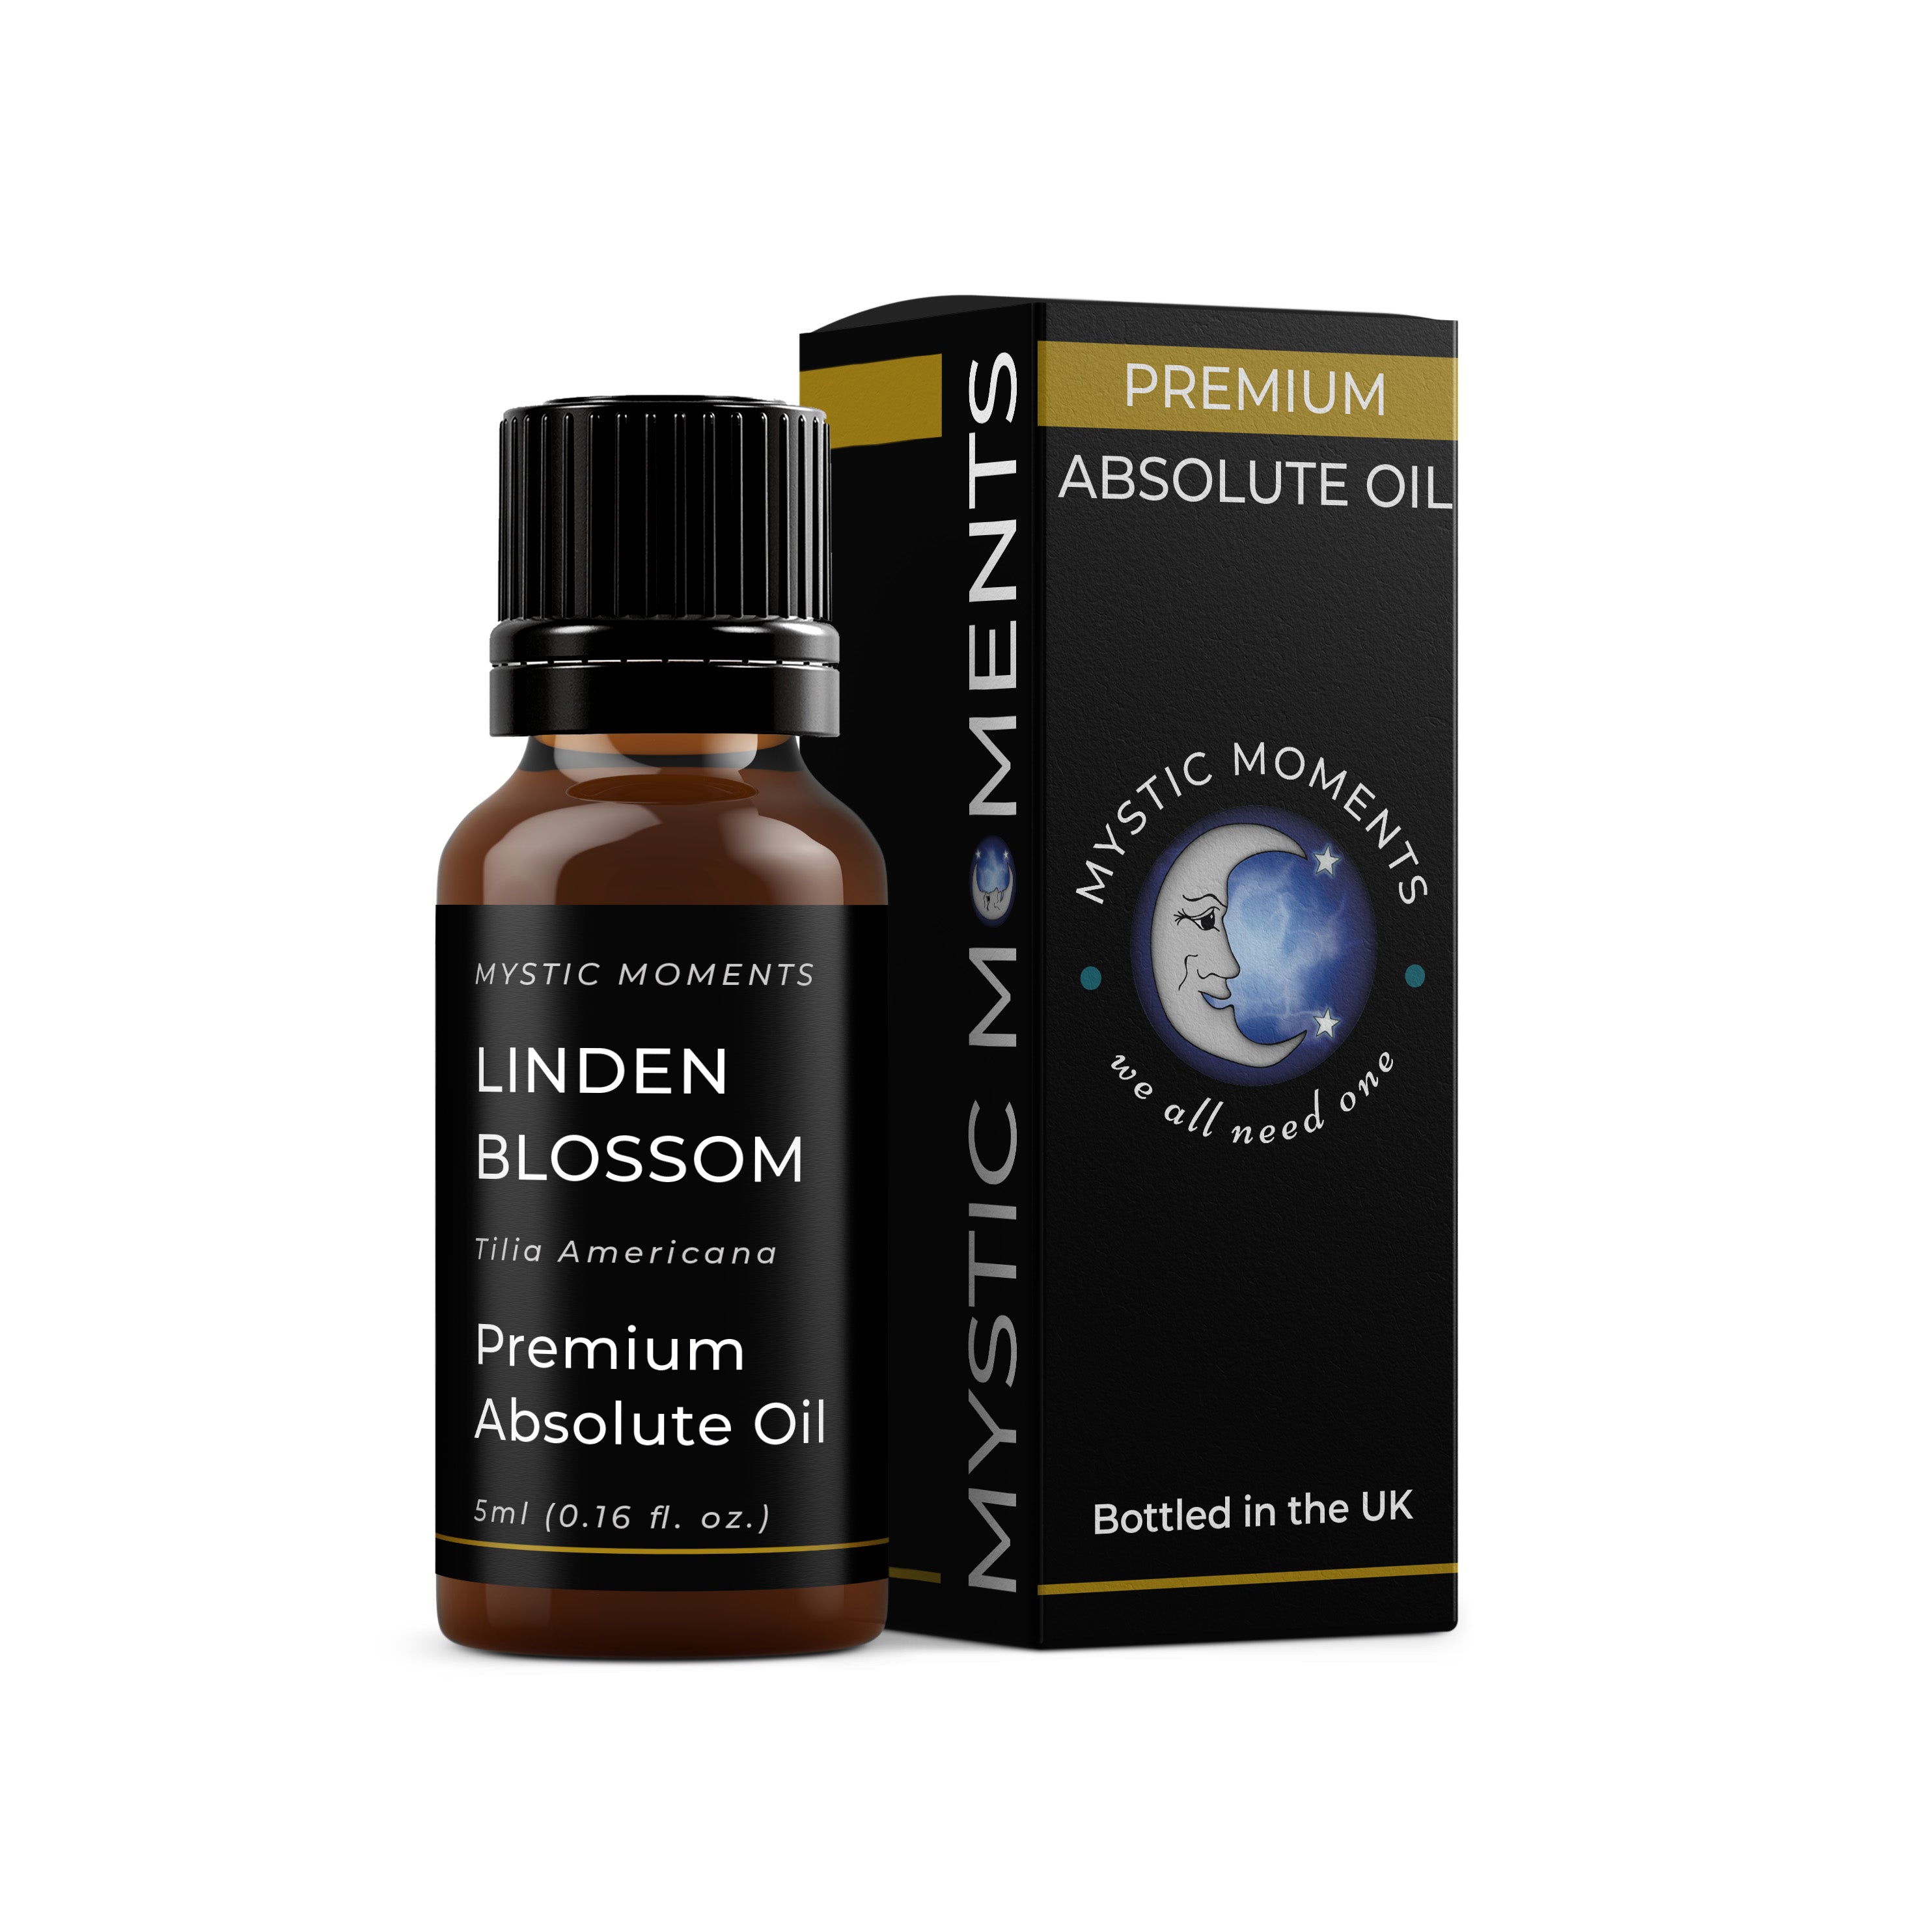 Linden Blossom - Absolute Oil